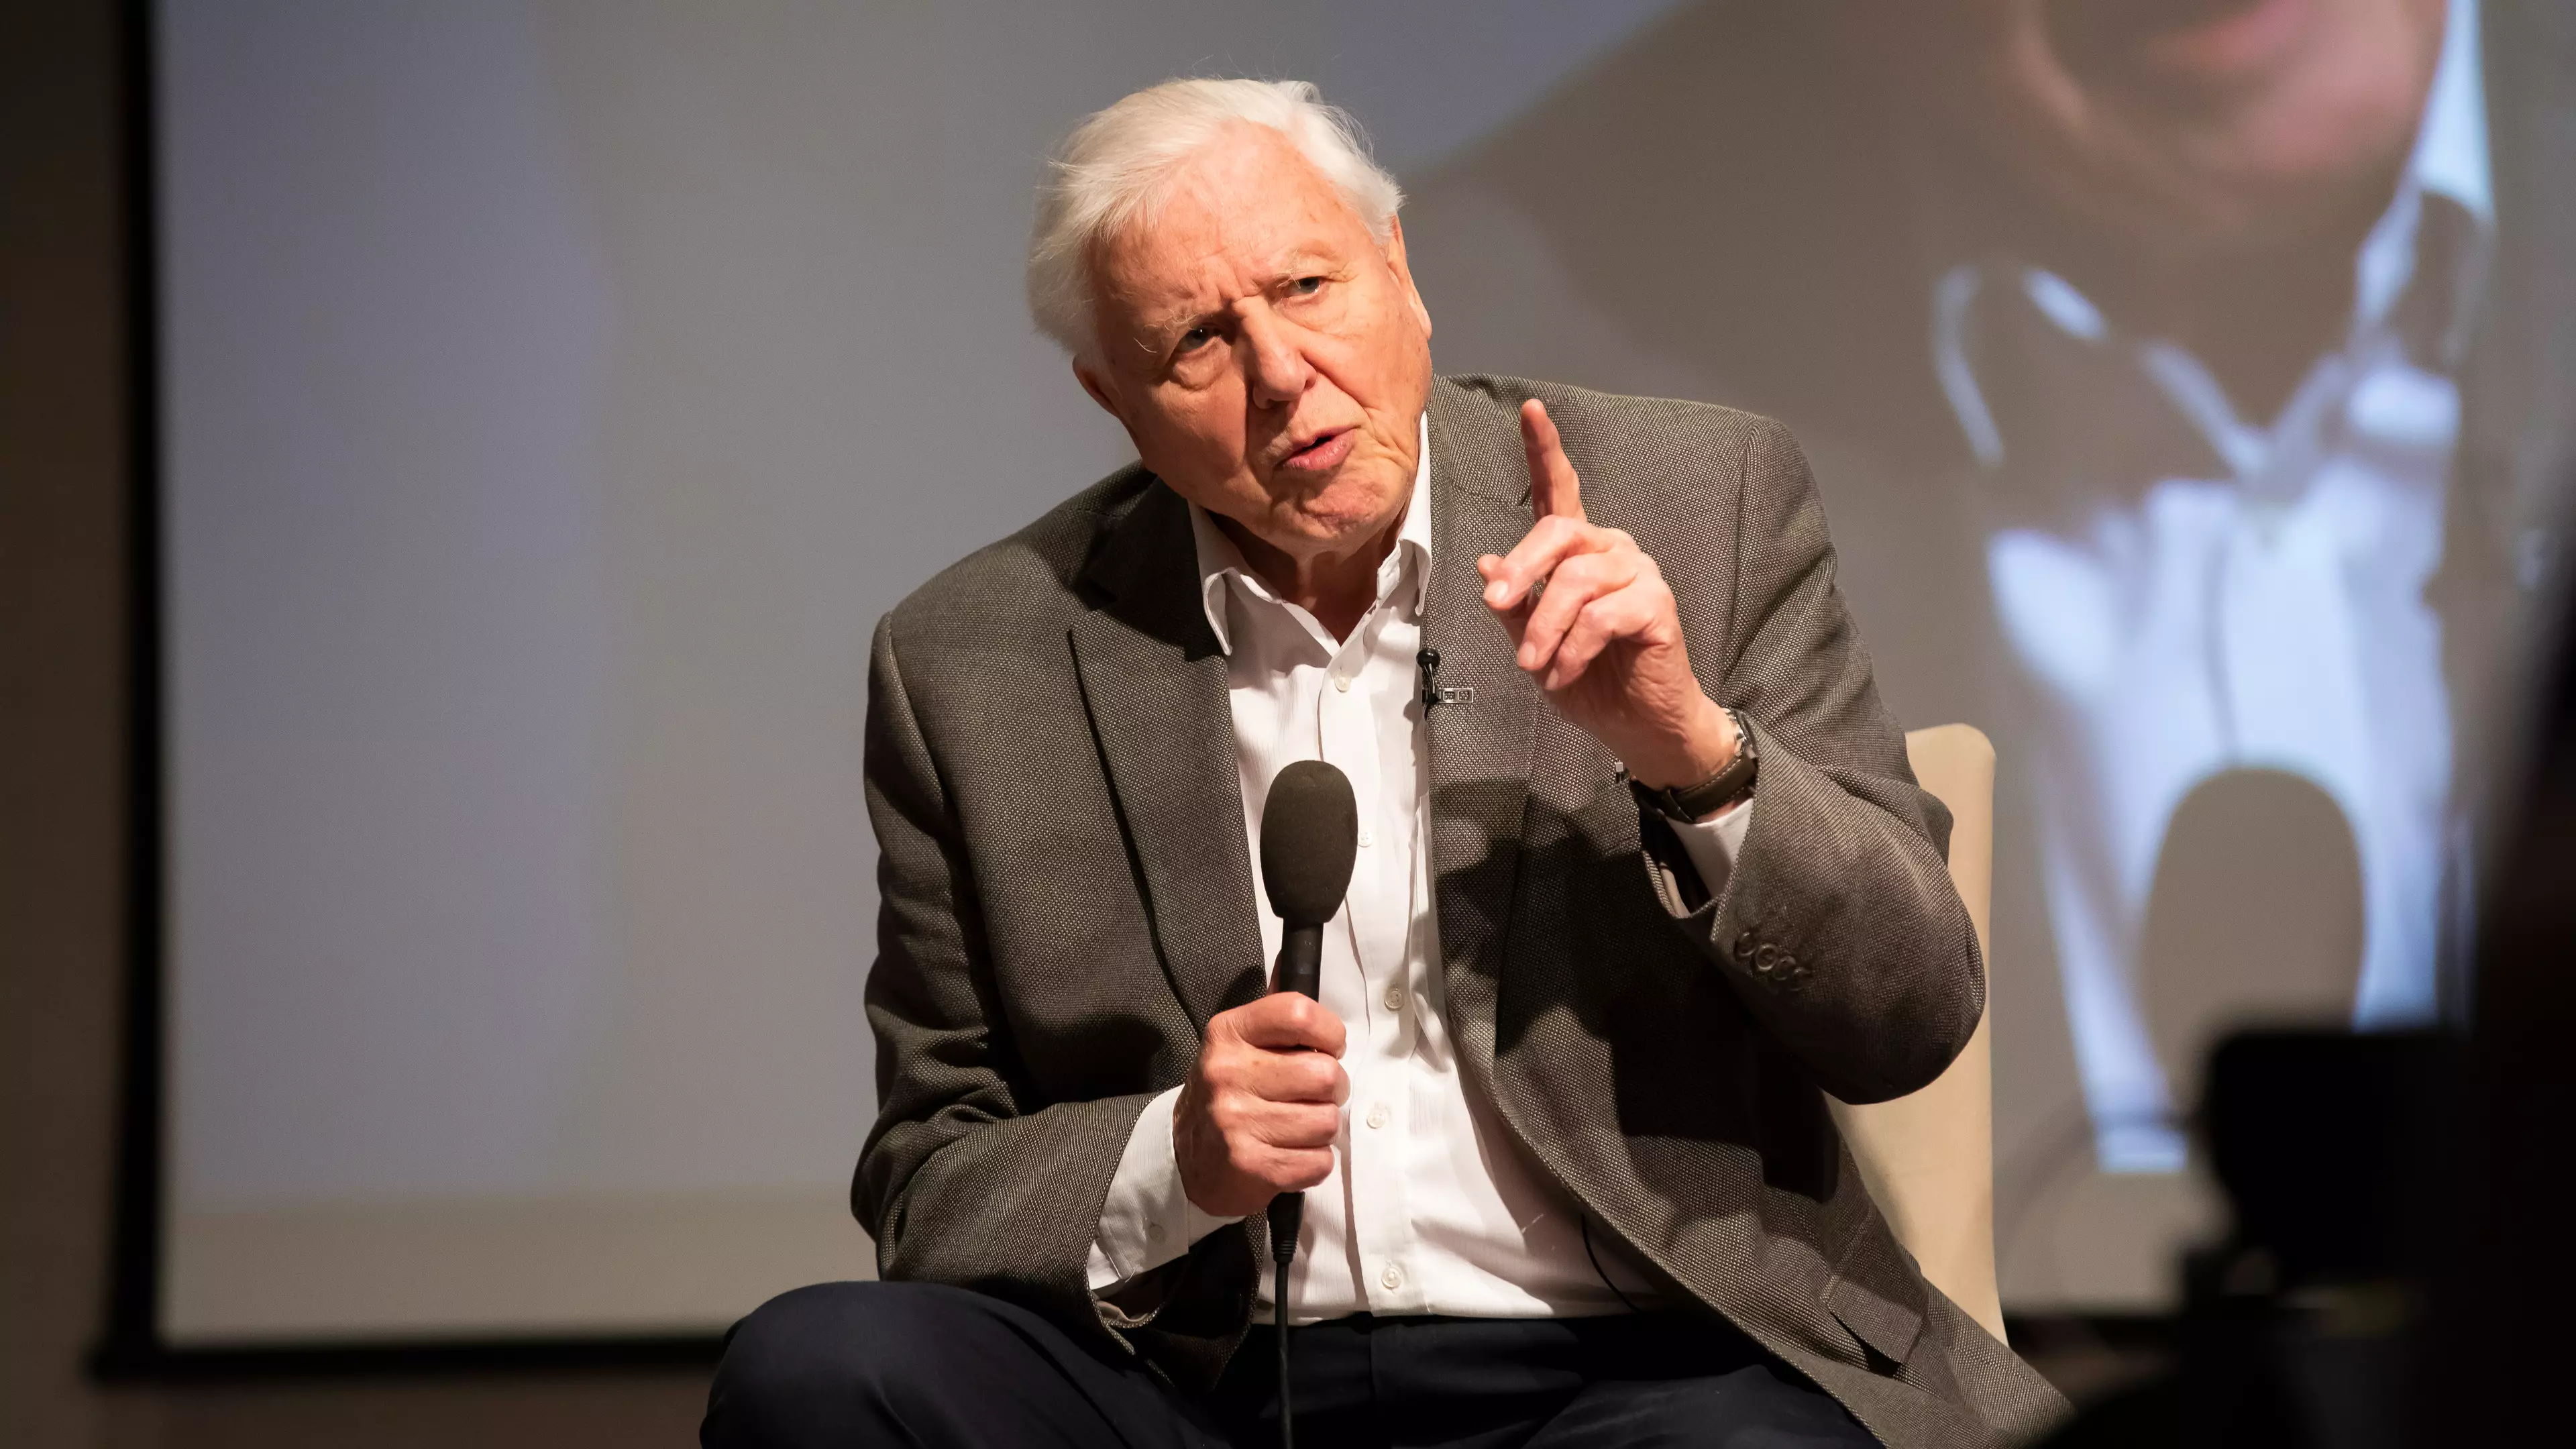 Sir David Attenborough Is Campaigning To Raise £12 Million To Save London Zoo